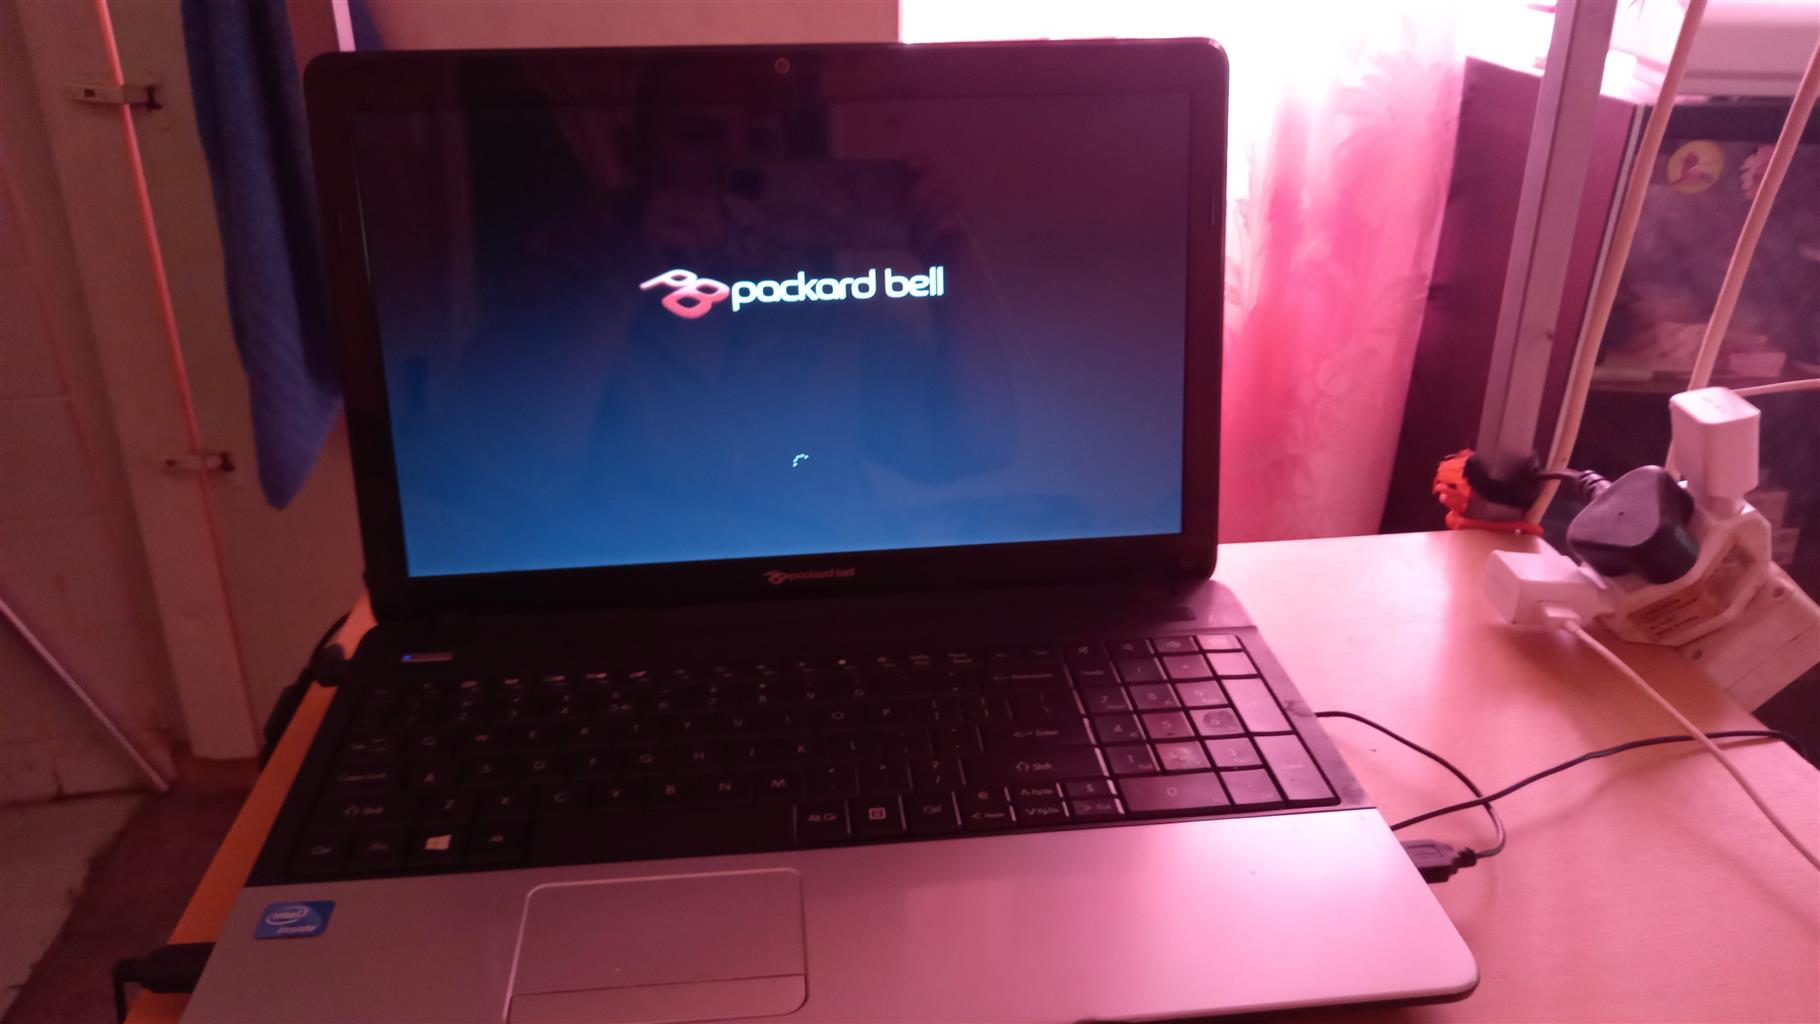 Laptop Packard bell and tumble dryer defy